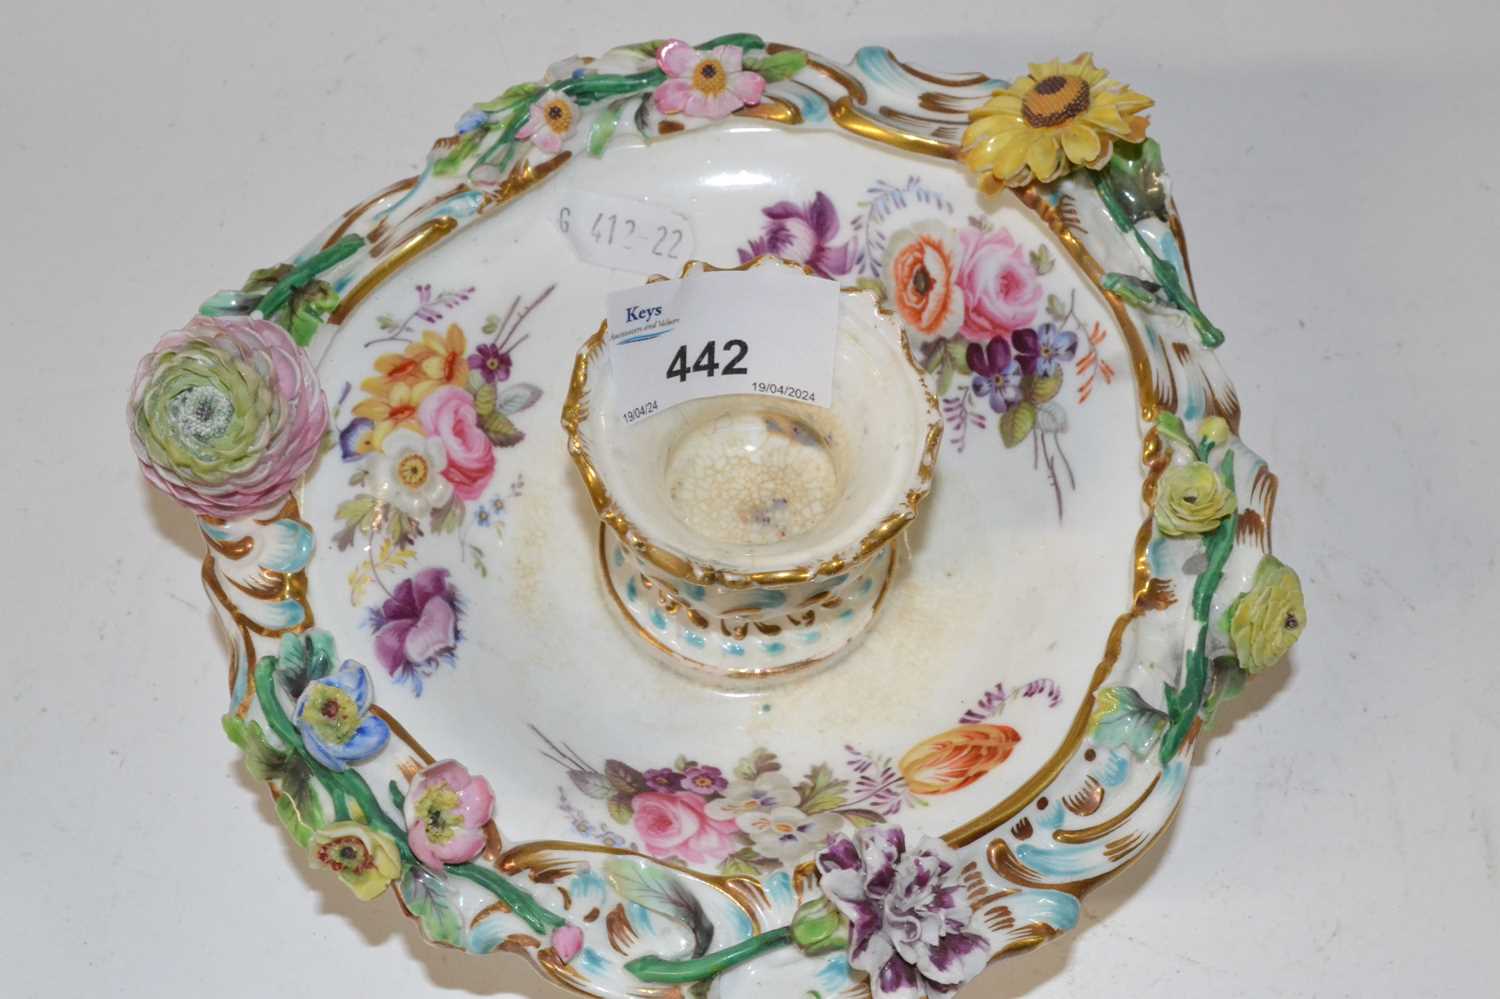 A 19th Century porcelain candle holder painted with floral sprays and flowers in relief - Image 2 of 3